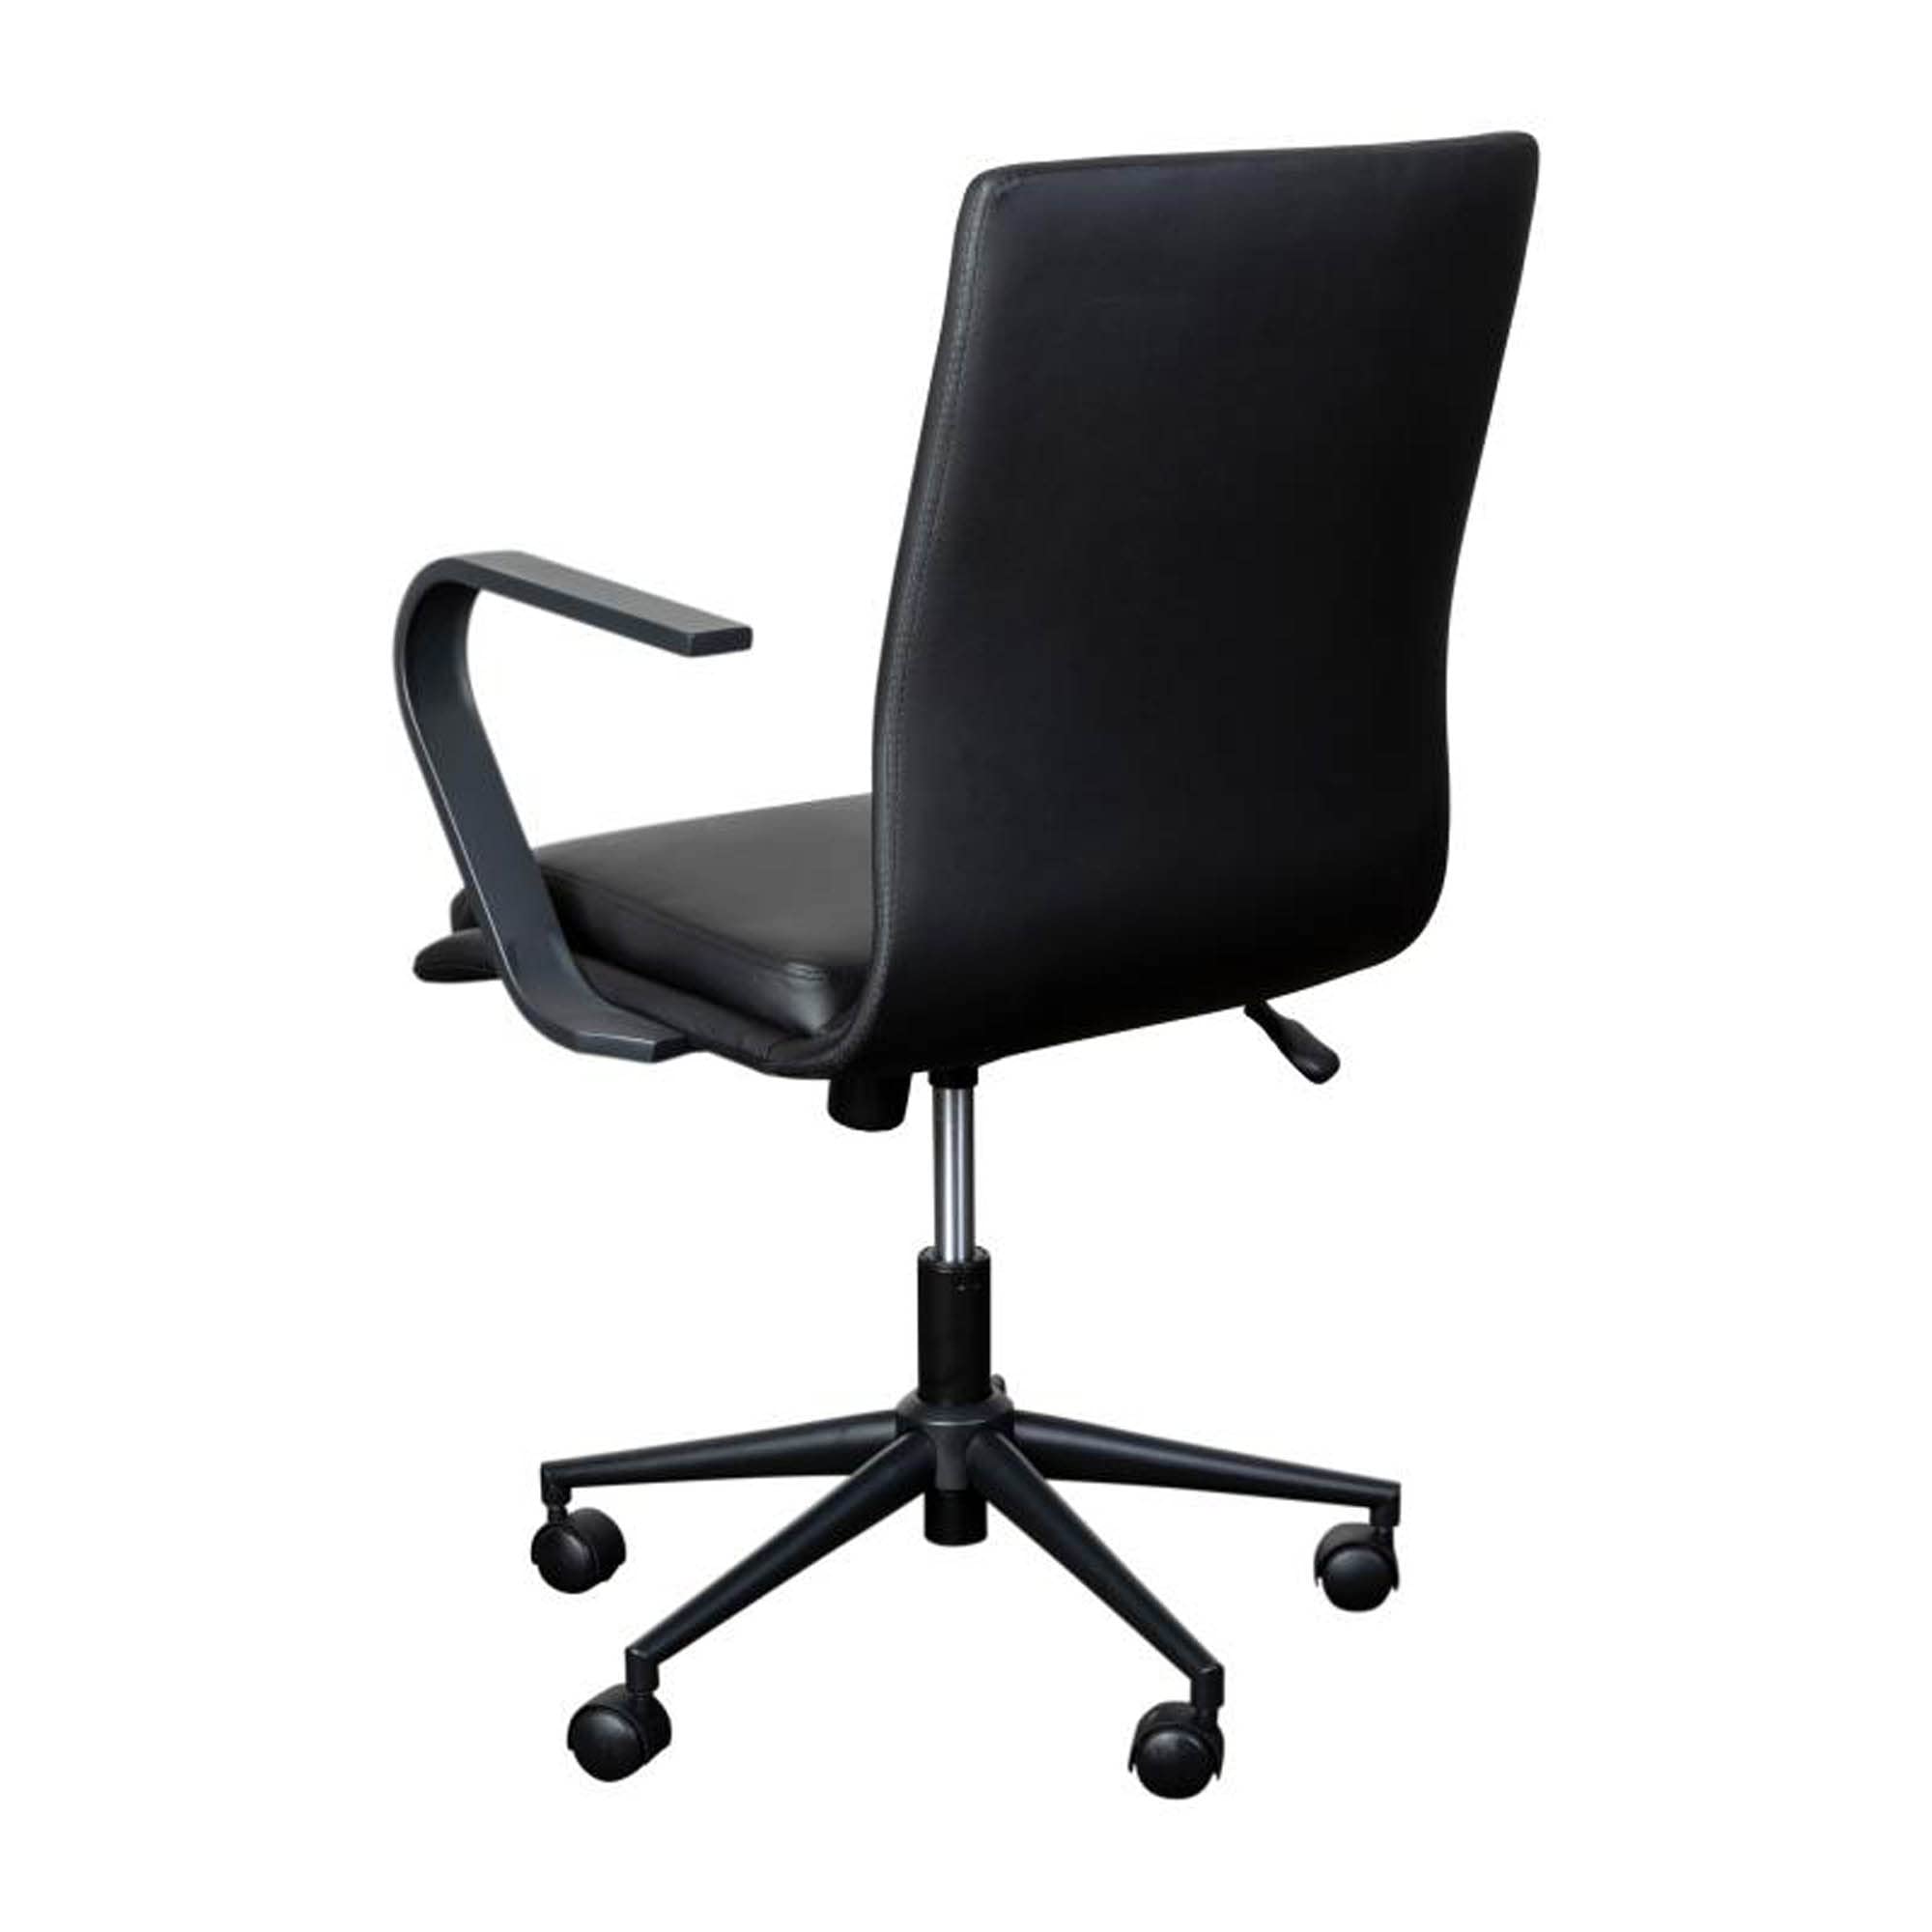 Flash Furniture James Mid-Back Designer Executive Office Chair - Black LeatherSoft Upholstery - Black Base and Arms - Height Adjustable 360° Swivel Seat